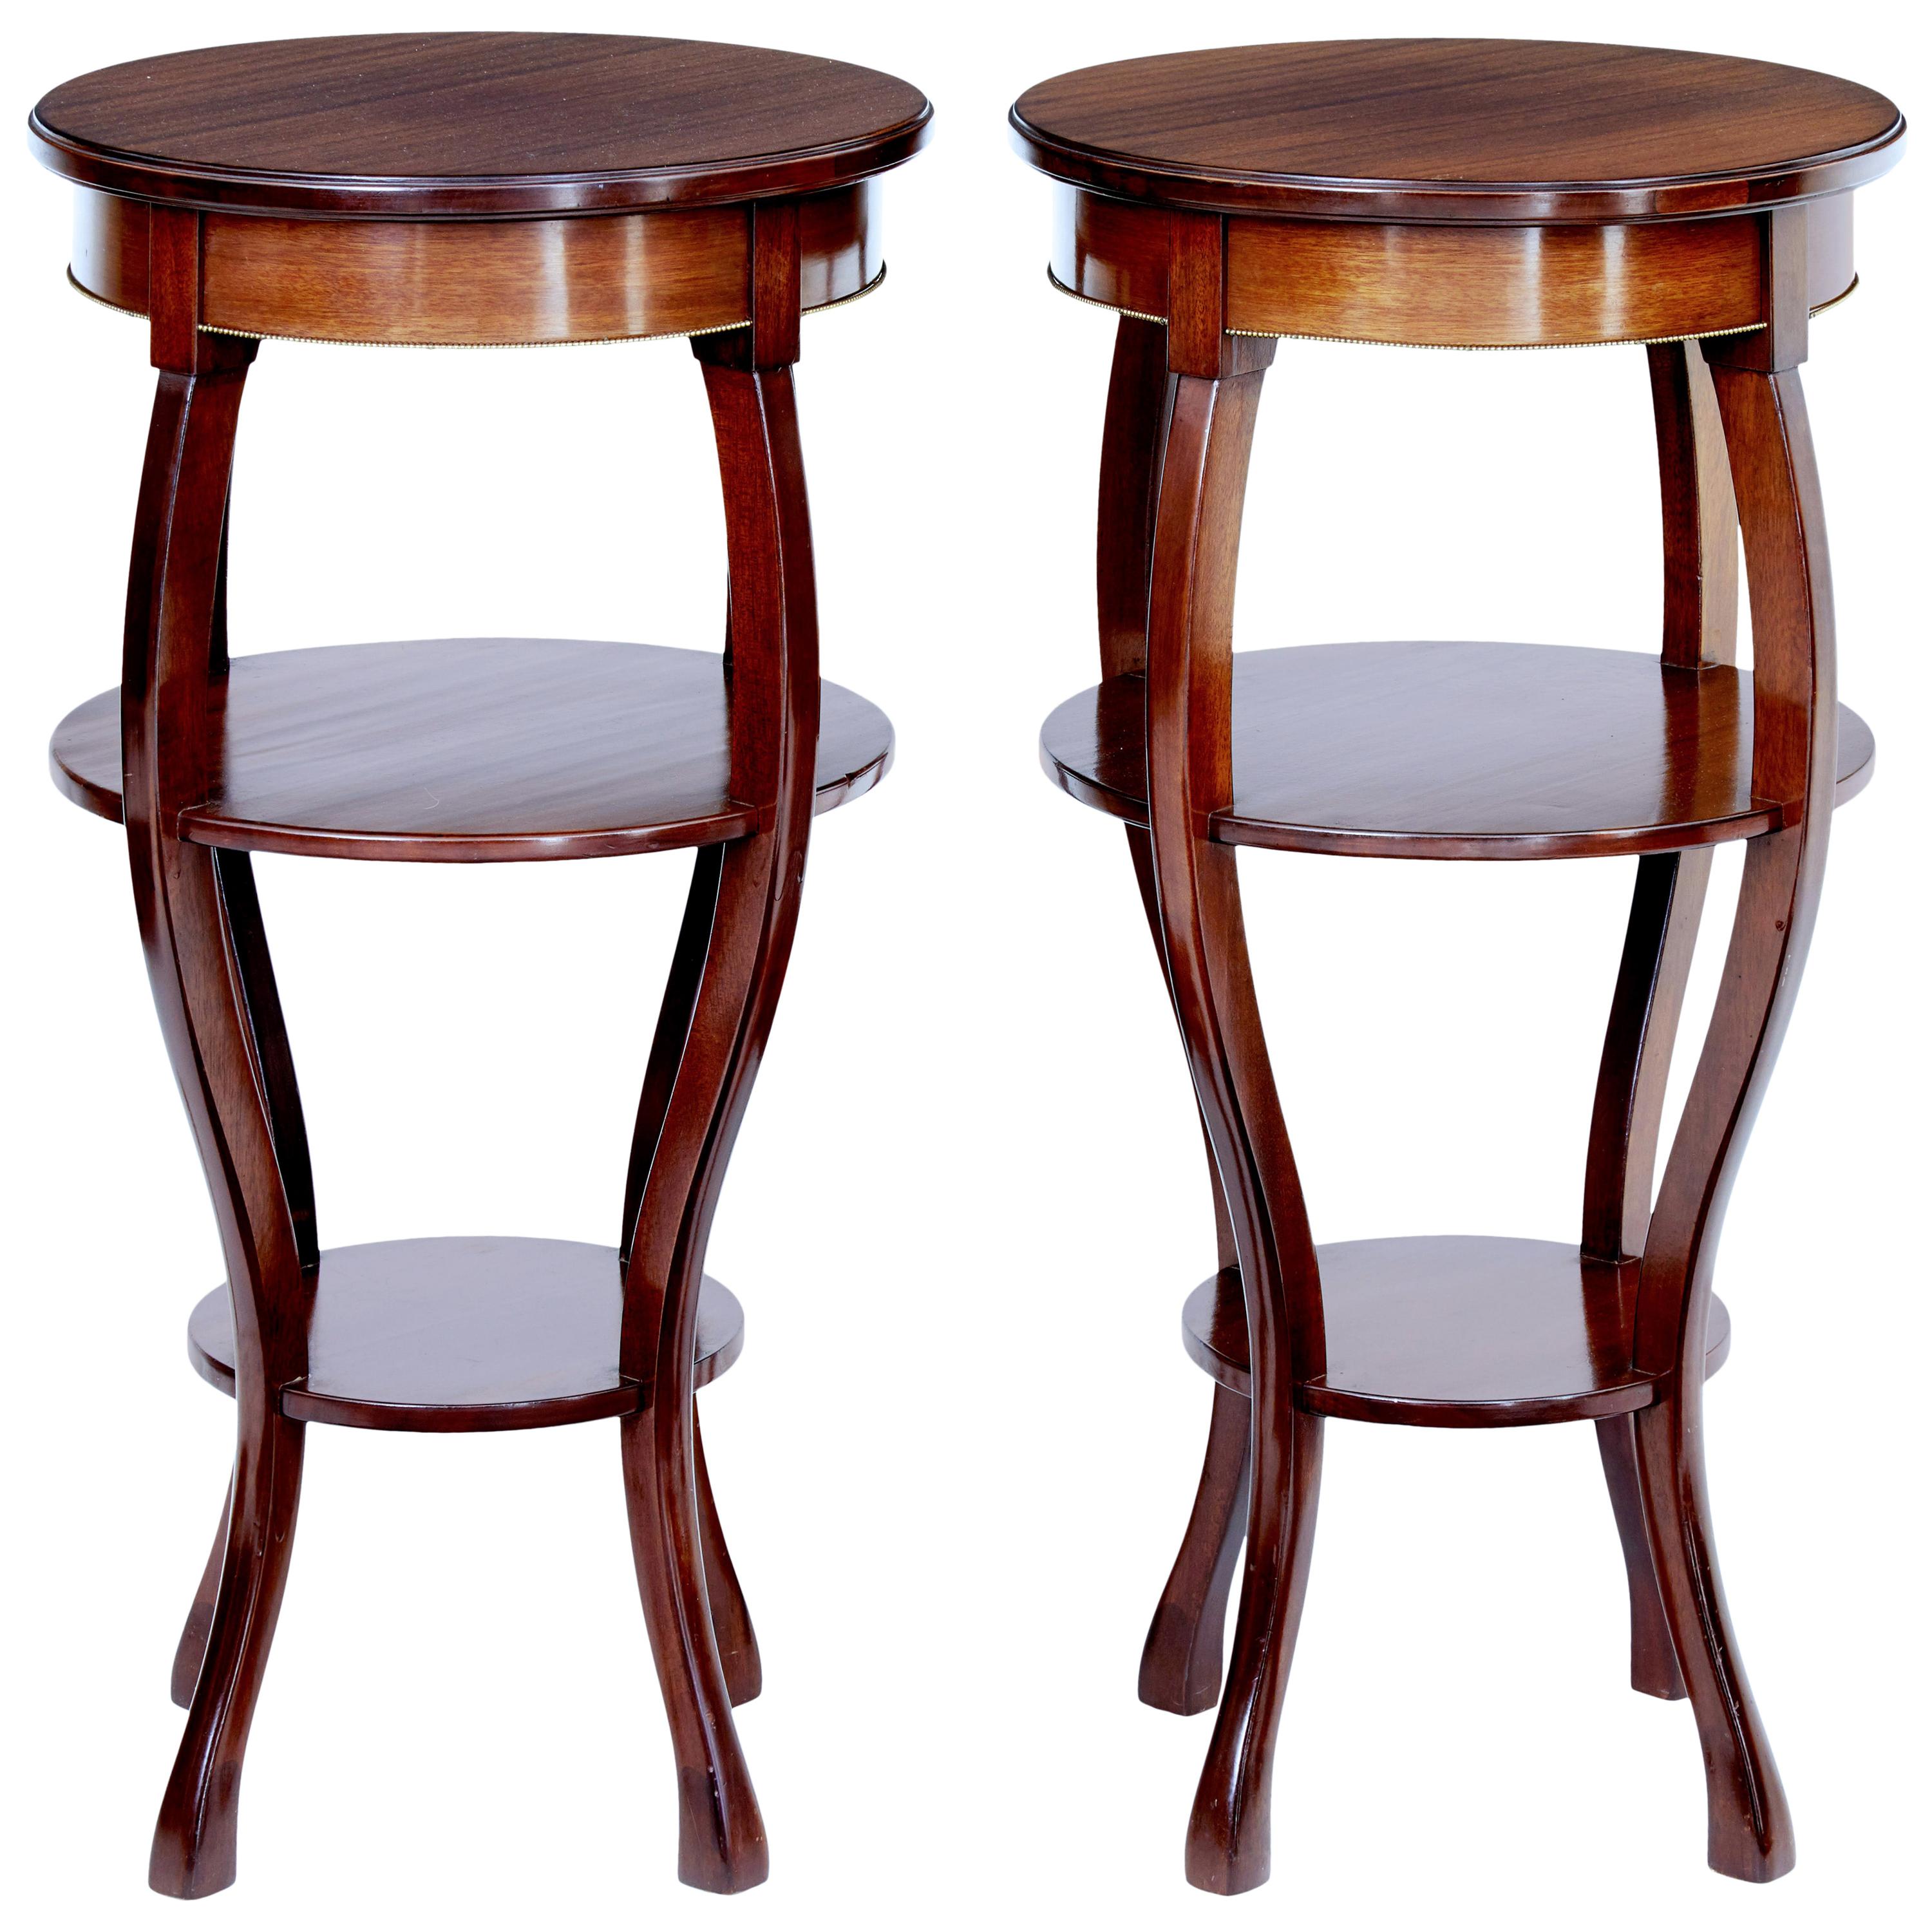 Pair of Mid-20th Century Tiered Mahogany Lamp Tables